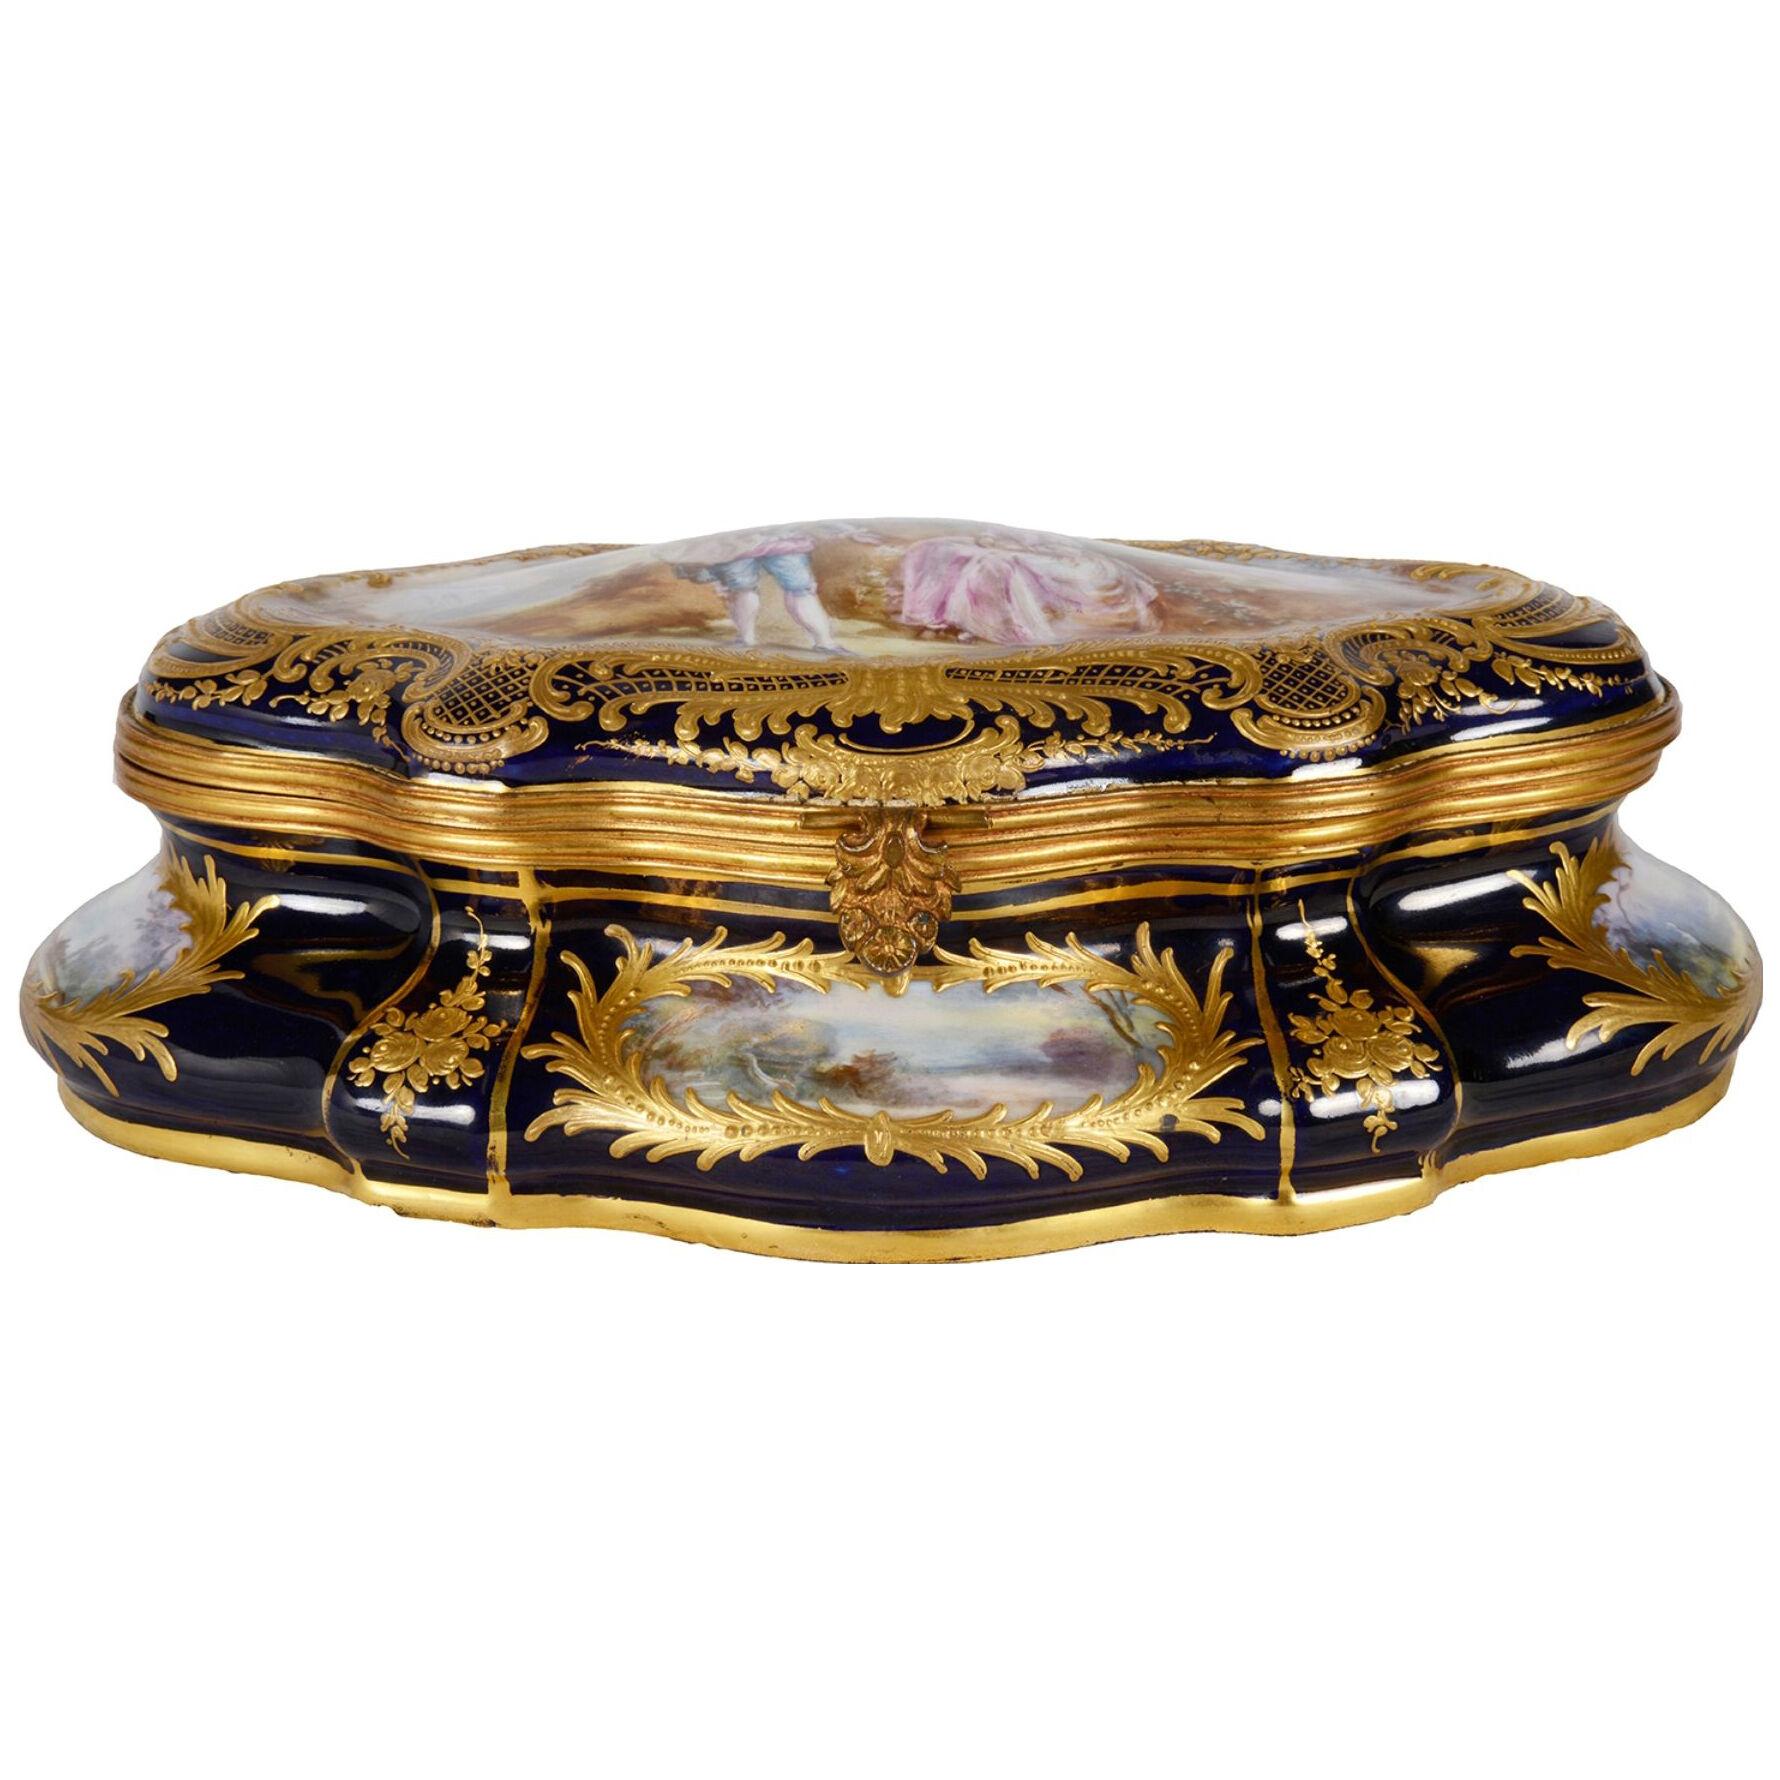 Late 19th Century Sevres style porcelain box.